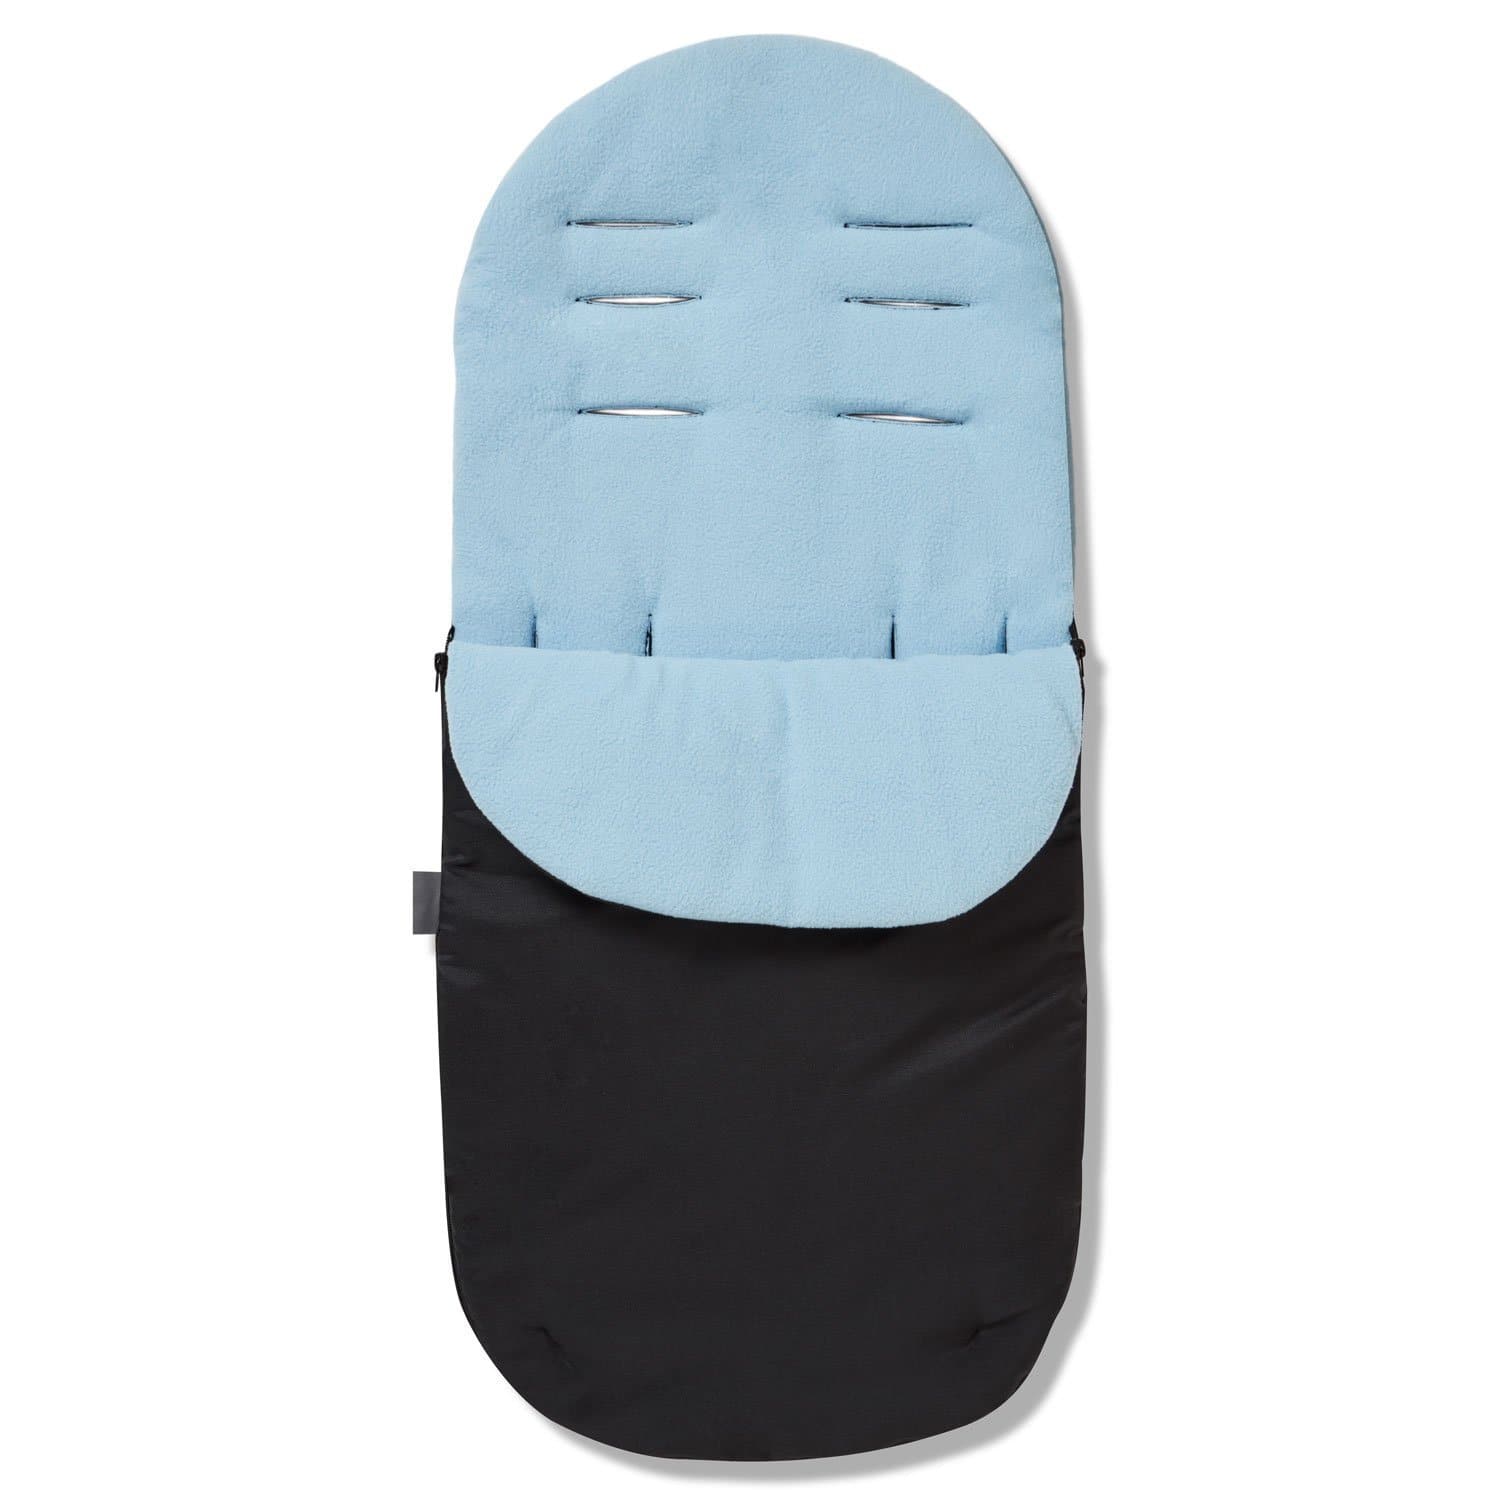 Footmuff / Cosy Toes Compatible with Stokke - Light Blue / Fits All Models | For Your Little One